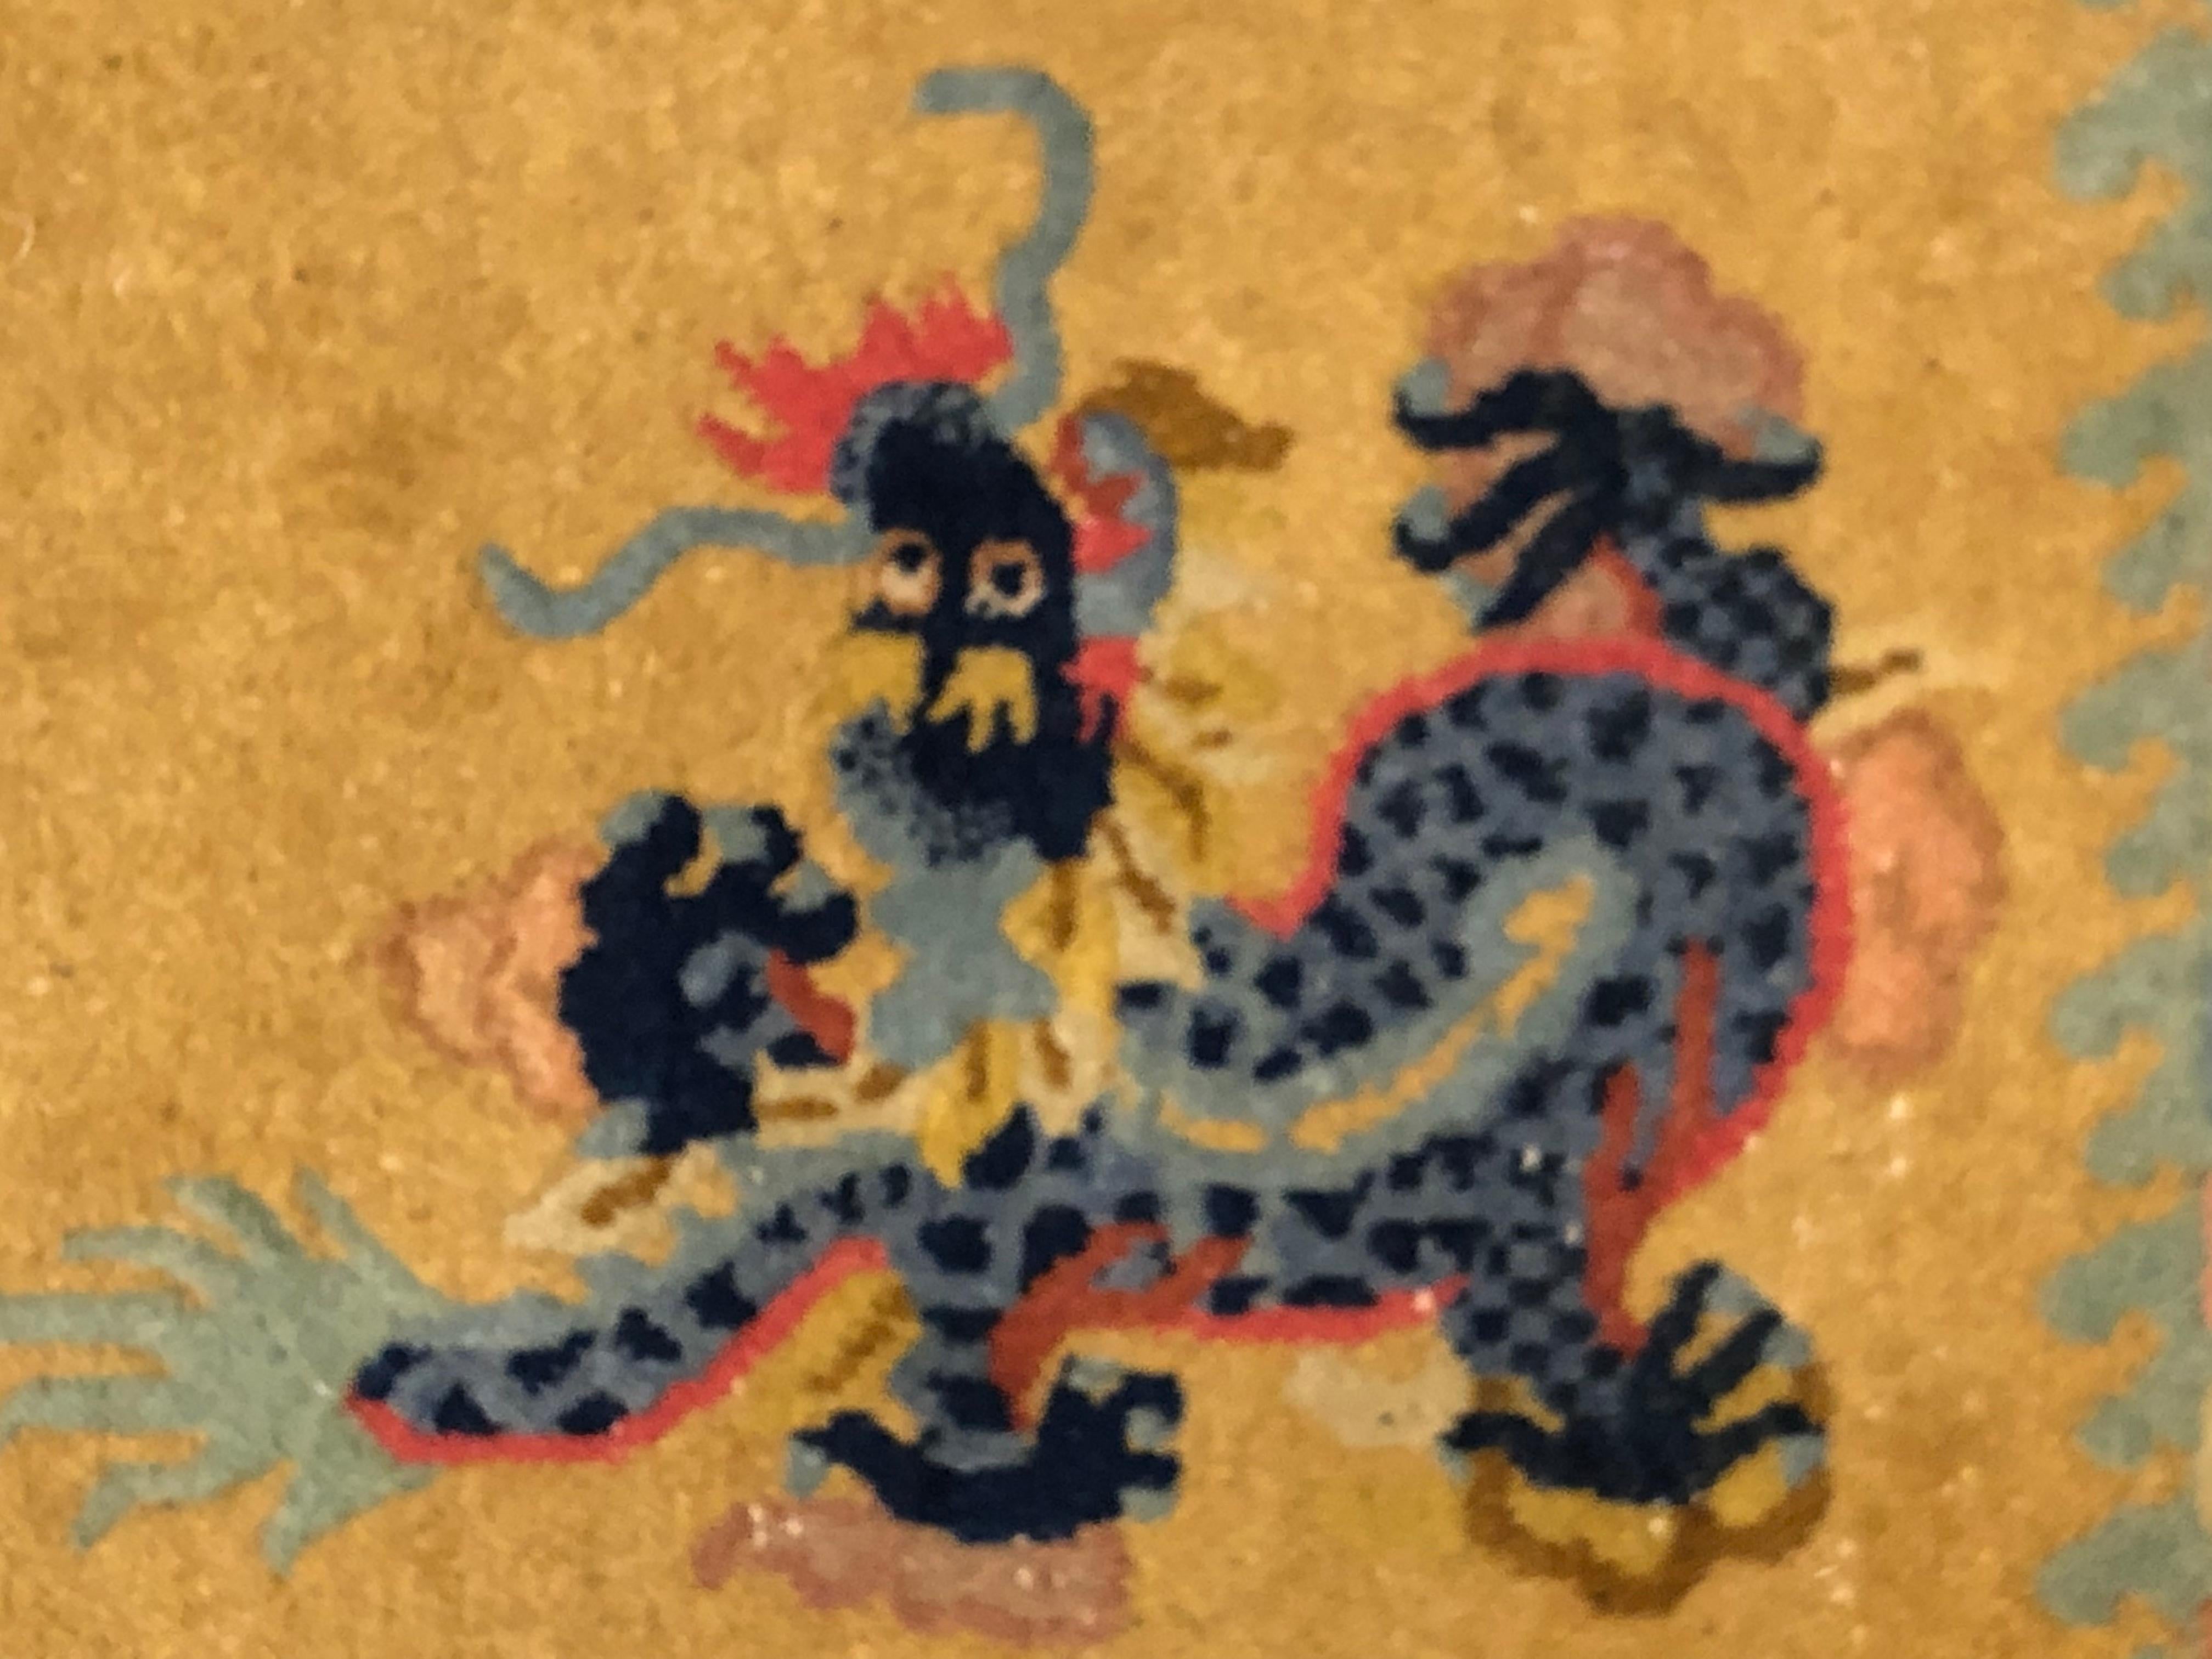 Rare Chinese carpet for the color of lemon yellow background. The subject of the decoration is that of the dance of the dragons, enriched by an important border where the Buddhist symbols of the good wishes are represented. The infinite knot that is